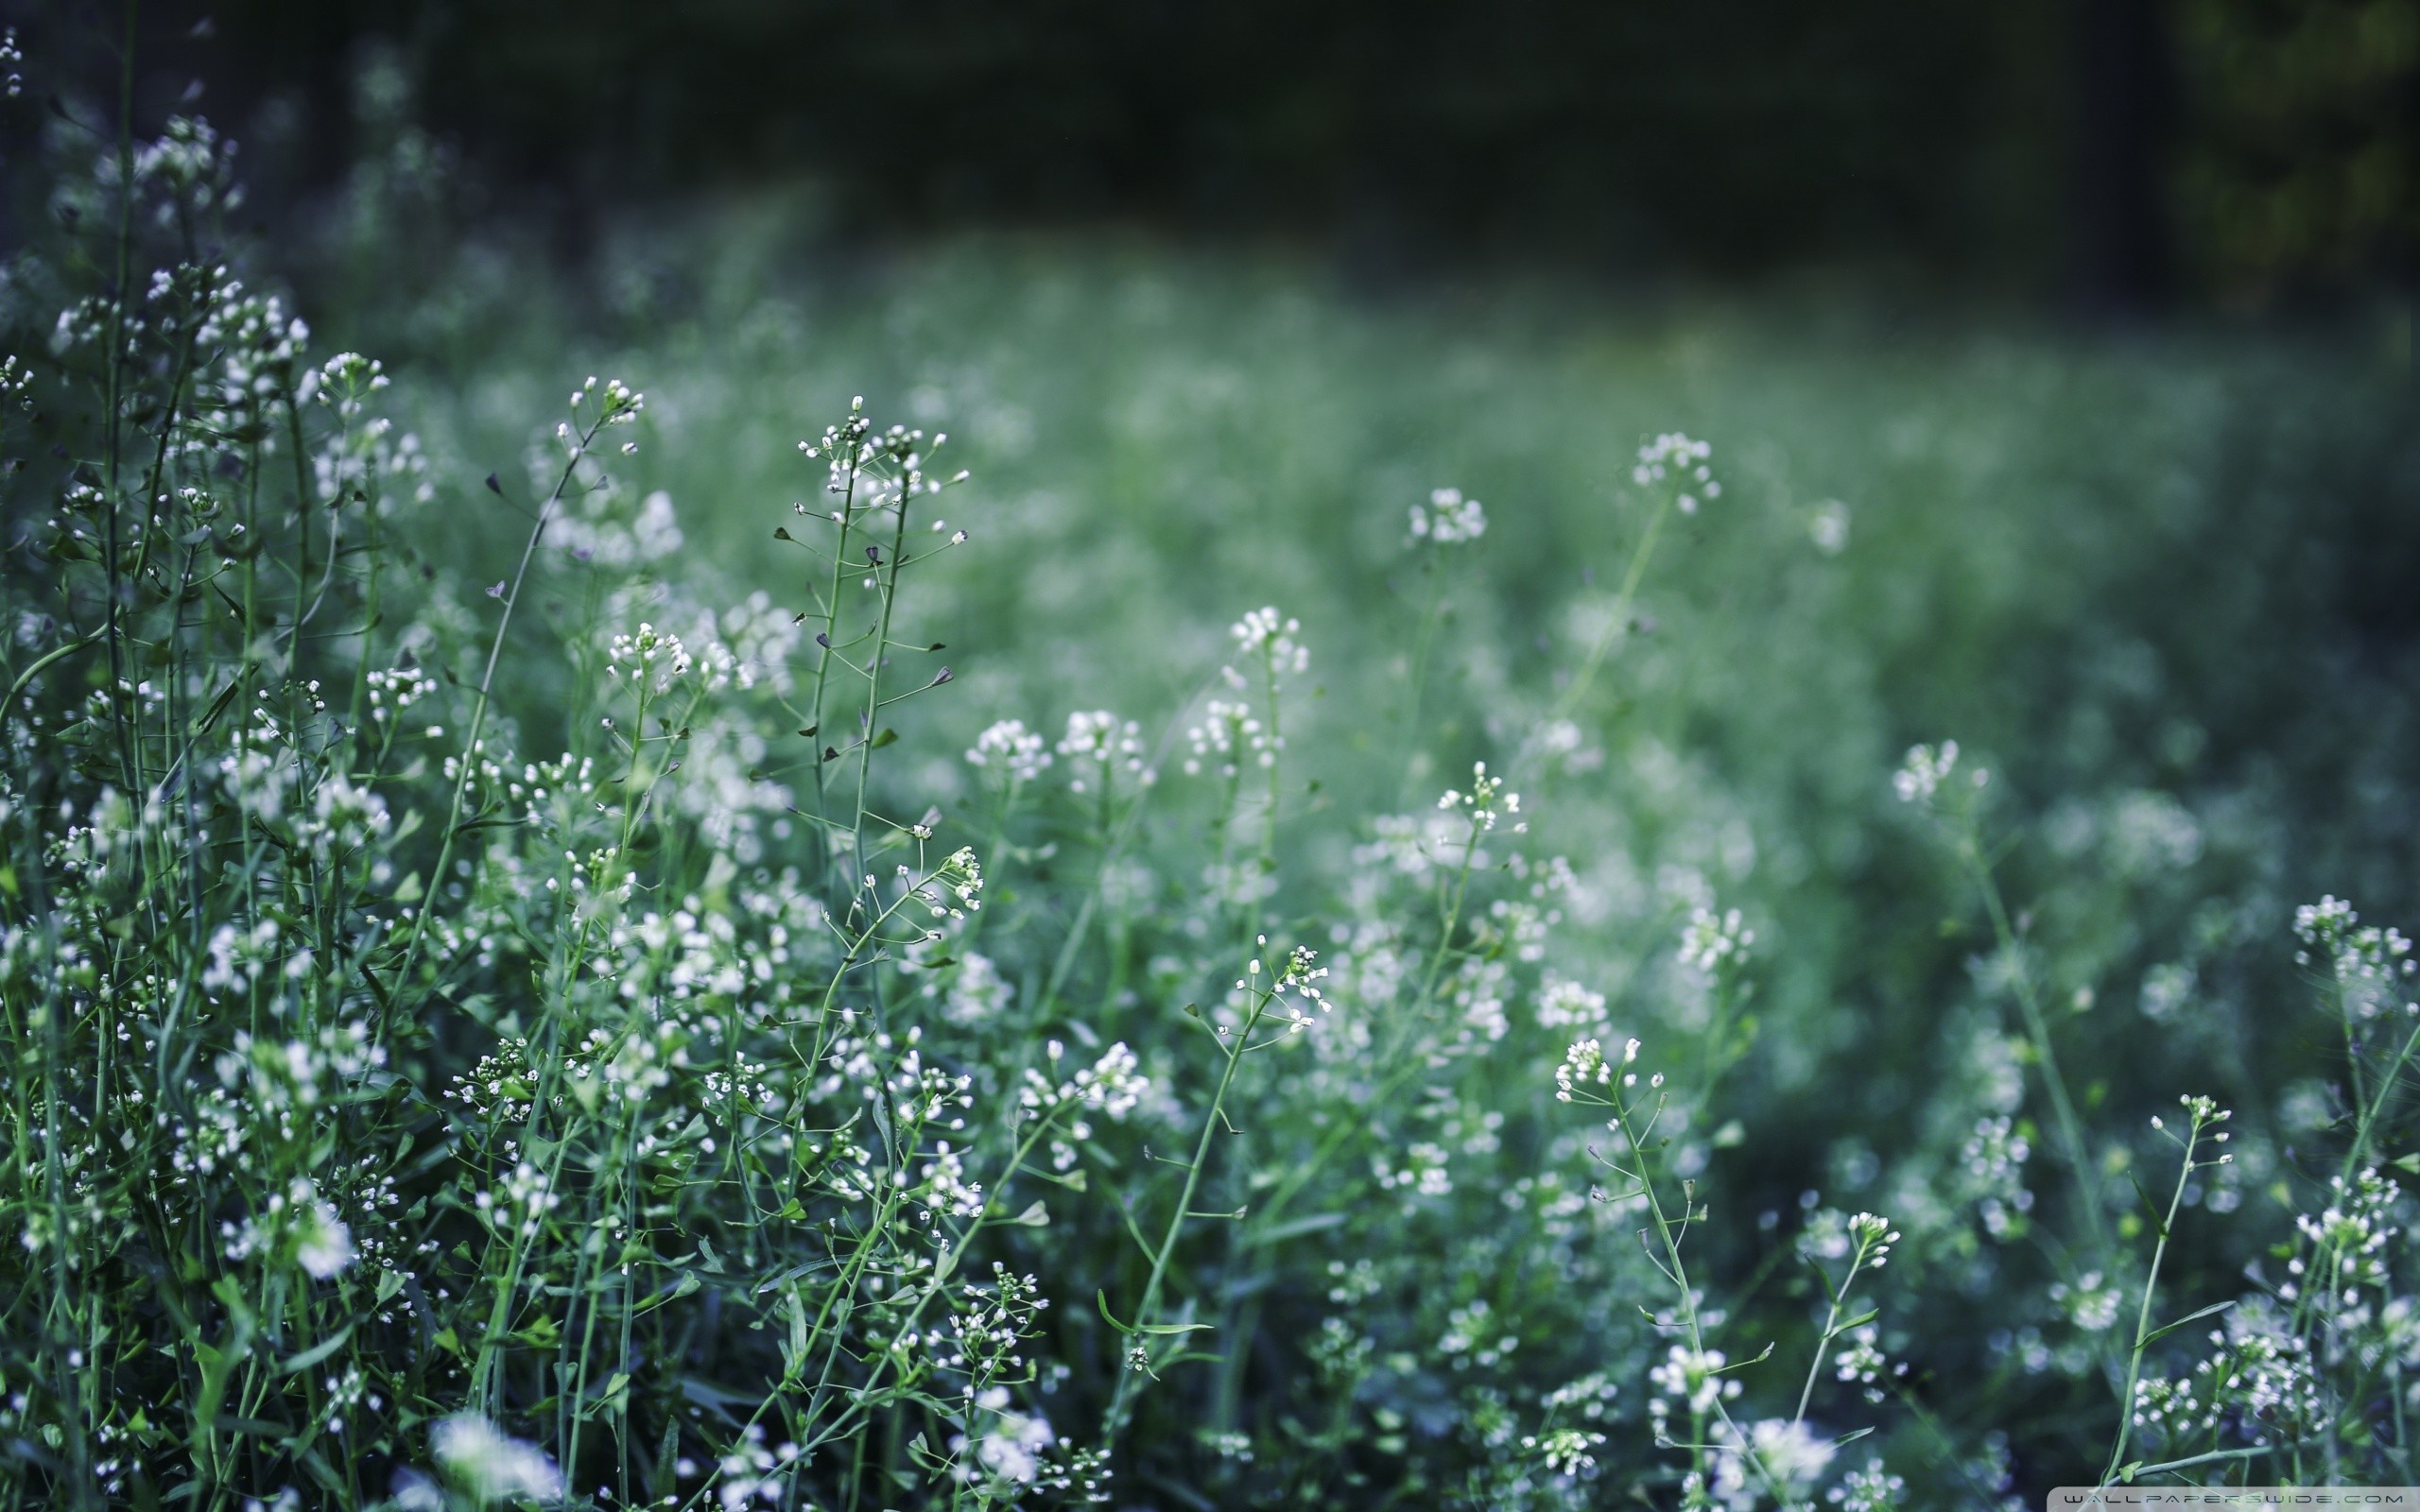 General 2560x1600 nature photography plants flowers bokeh